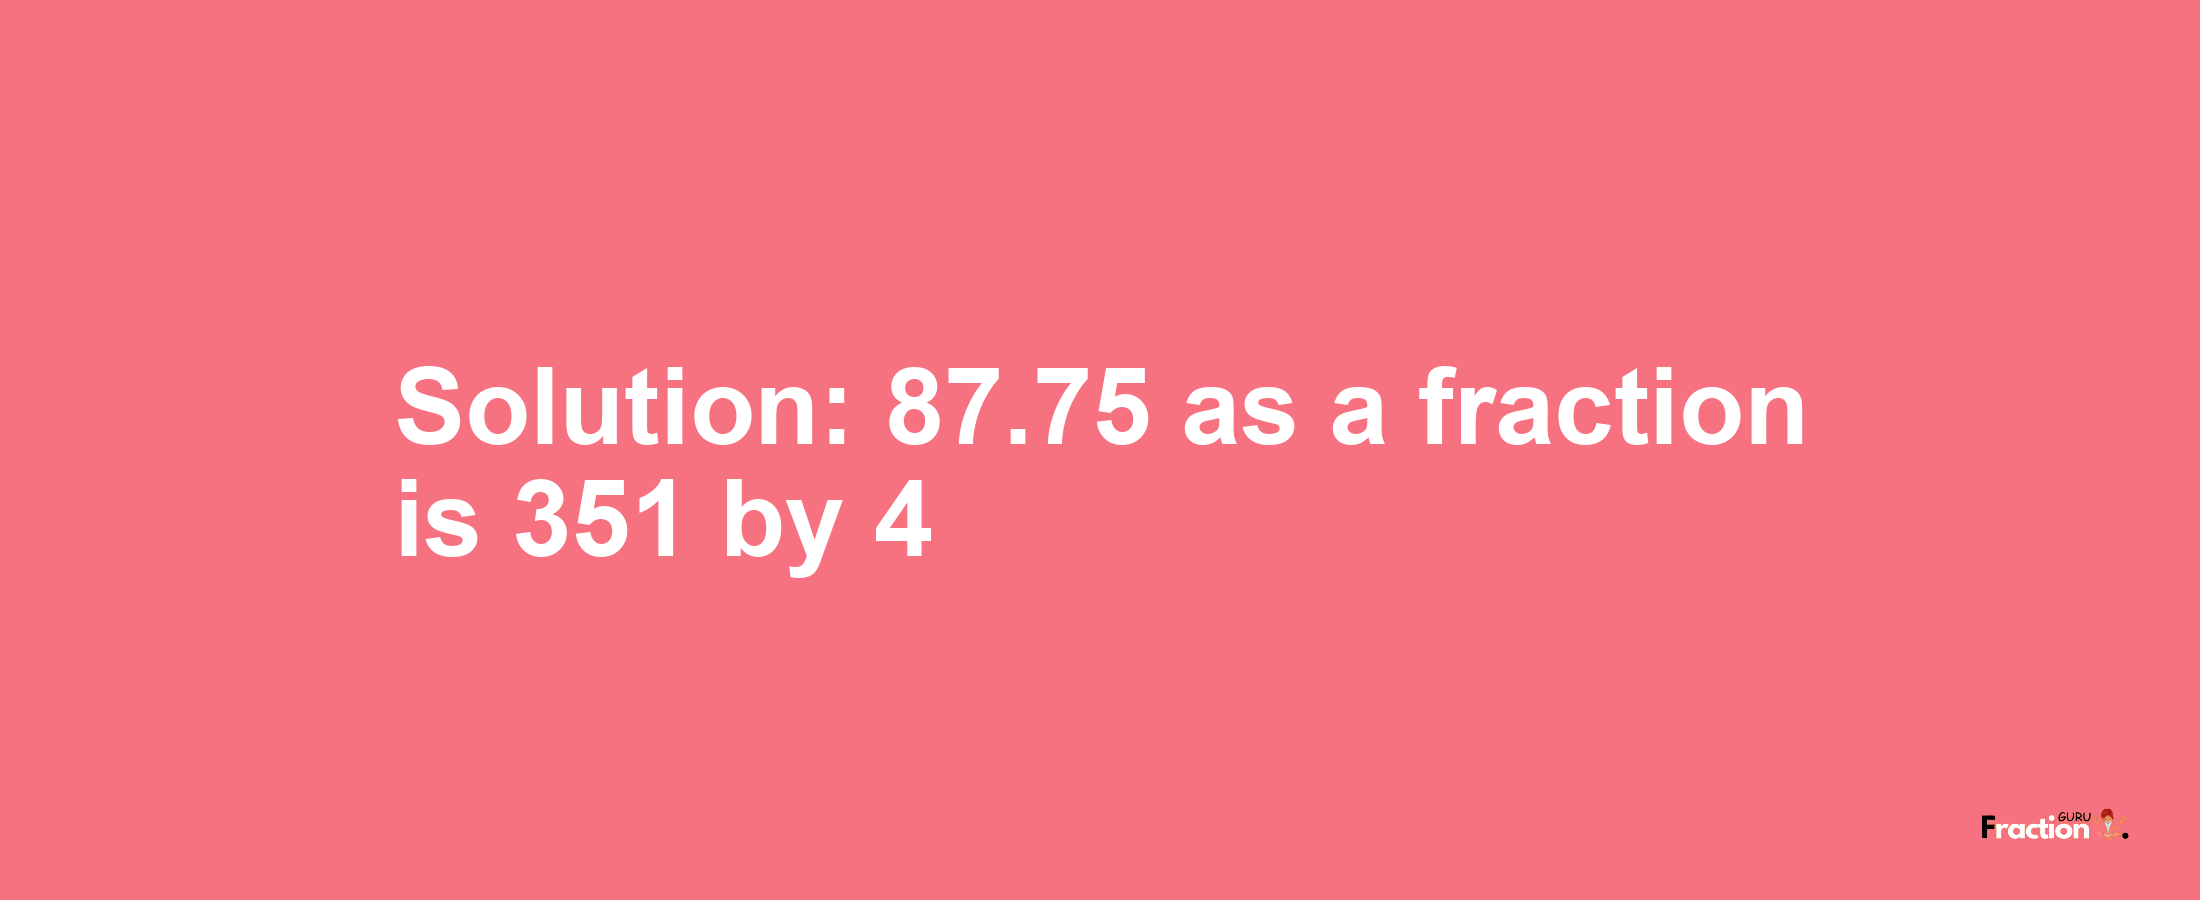 Solution:87.75 as a fraction is 351/4